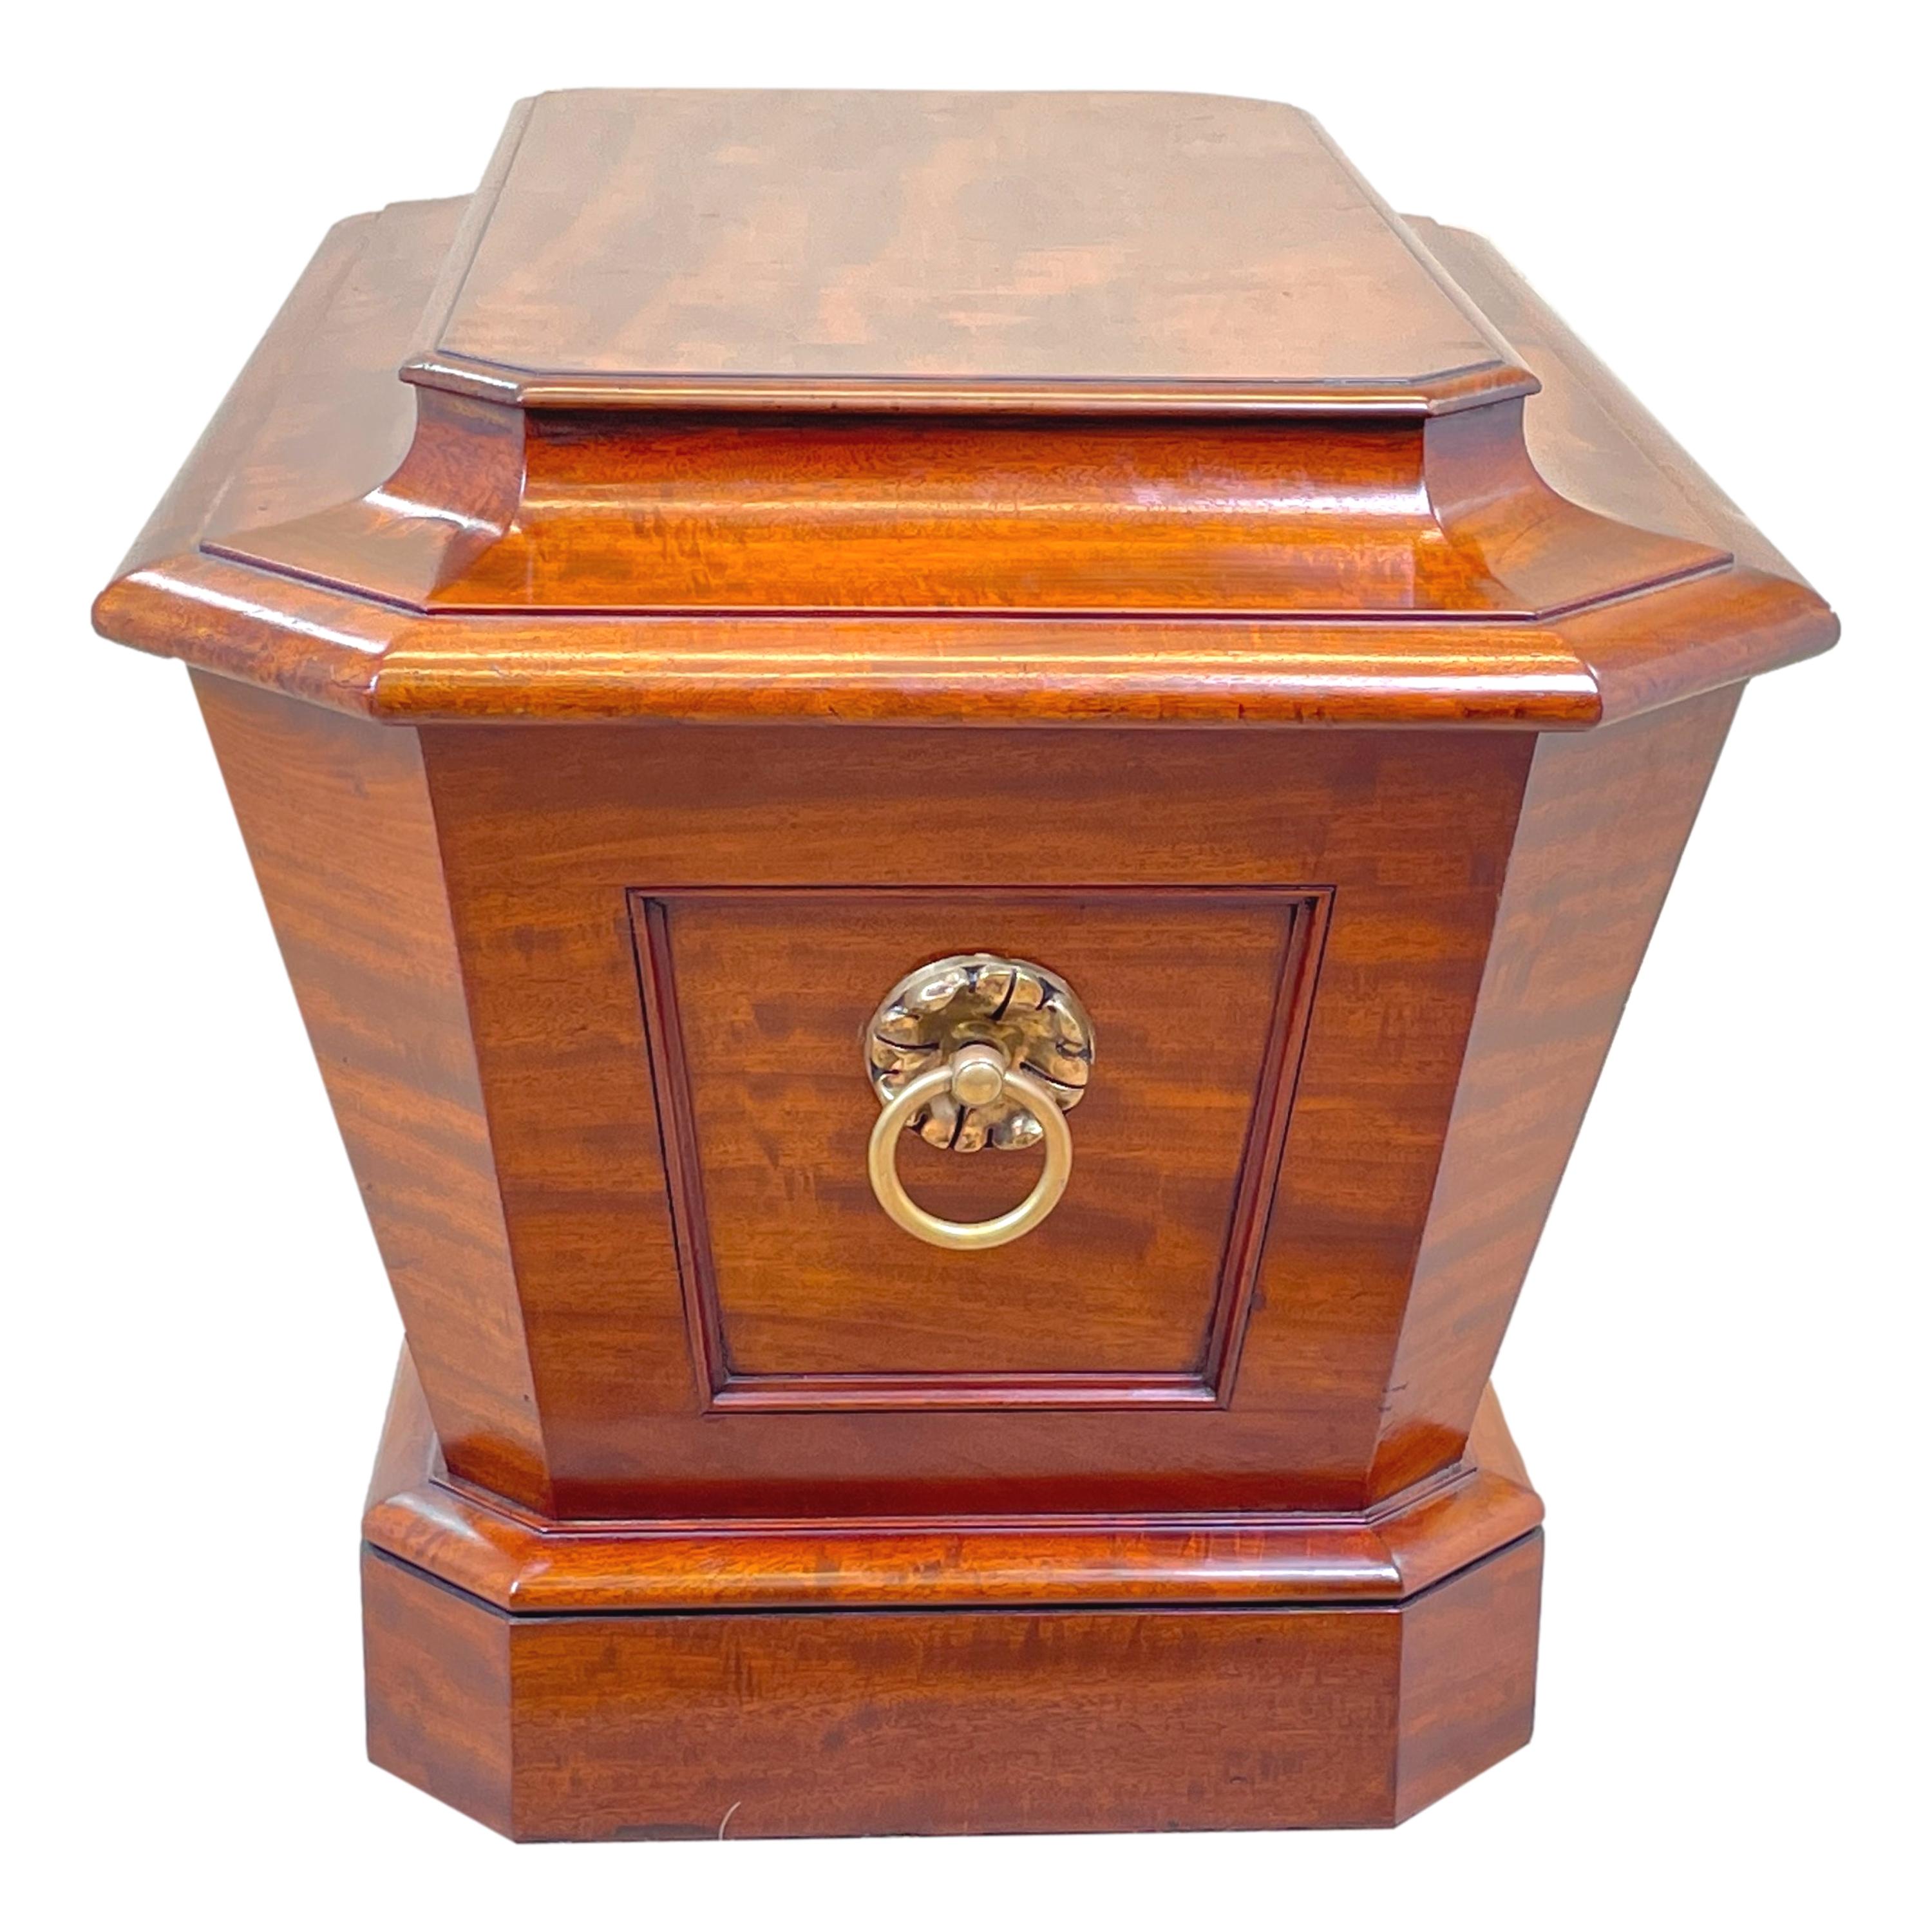 A fine quality regency perioid mahogany sarcophagus shaped wine cooler, or cellarette, retaining original brass carrying handles and fine colour throughout, raised on original plinth base.

The choice of veneers used in this beautiful wine cooler